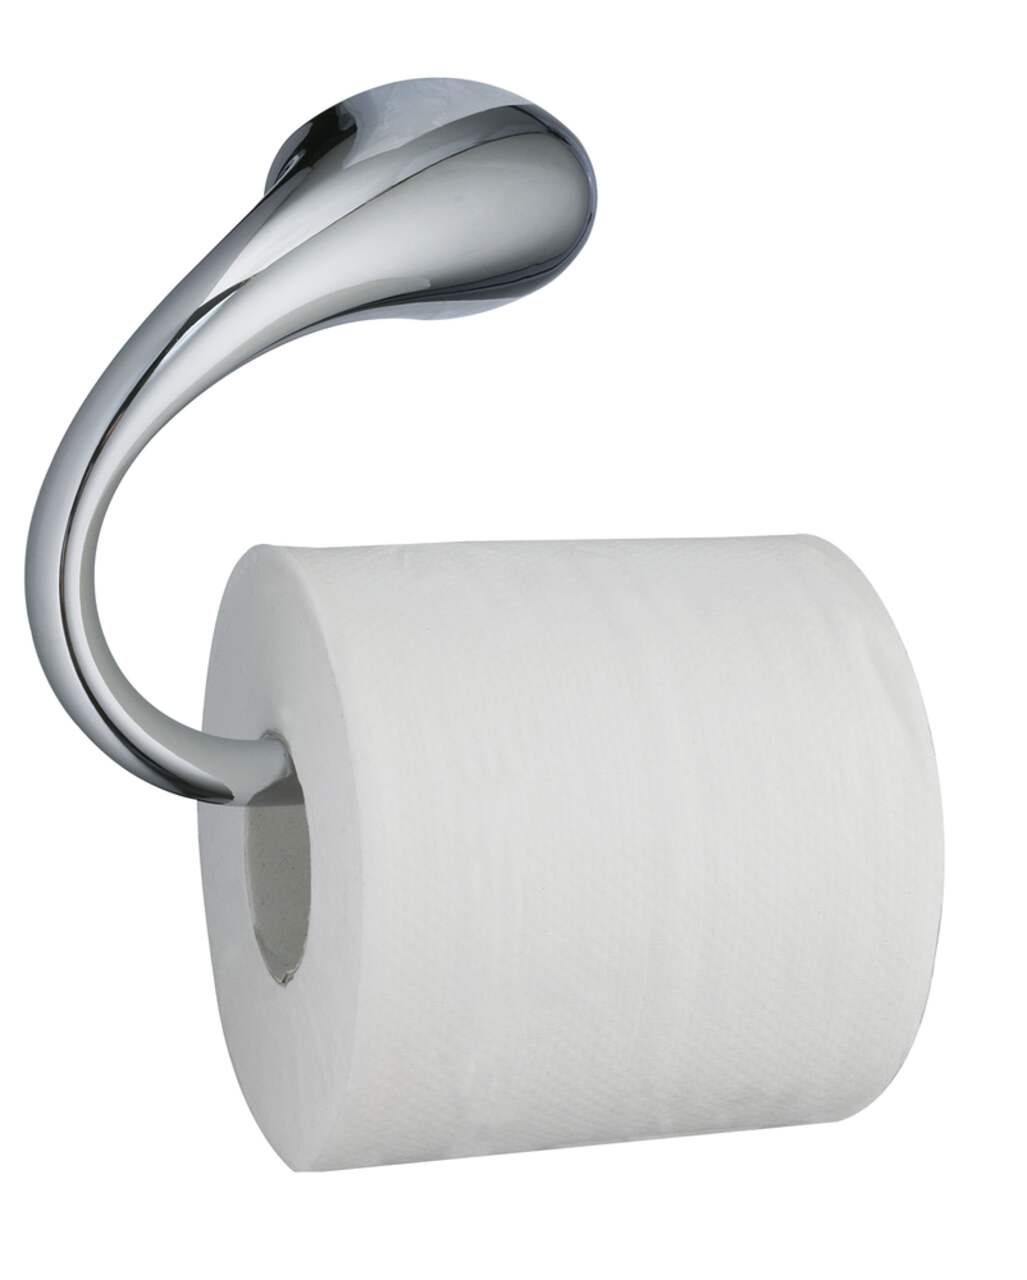 https://media-www.canadiantire.ca/product/fixing/plumbing/faucets-fixtures/0633153/chrome-toilet-paper-holder--31c77b0c-bea1-41d7-a26e-201ddaf1f5f9.png?imdensity=1&imwidth=640&impolicy=mZoom